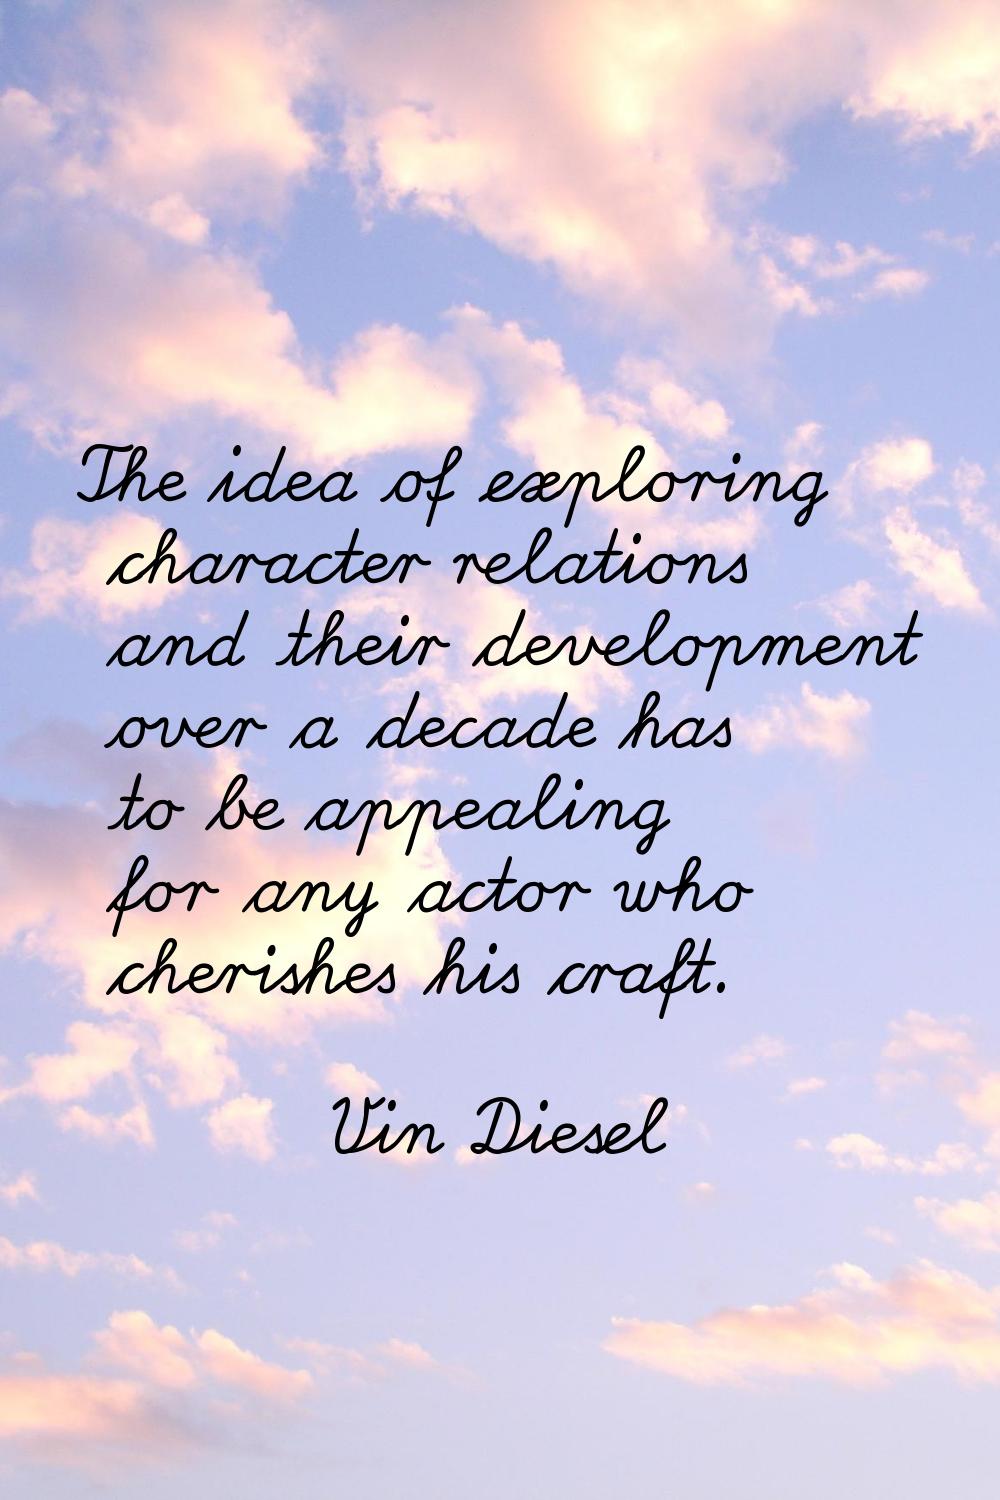 The idea of exploring character relations and their development over a decade has to be appealing f